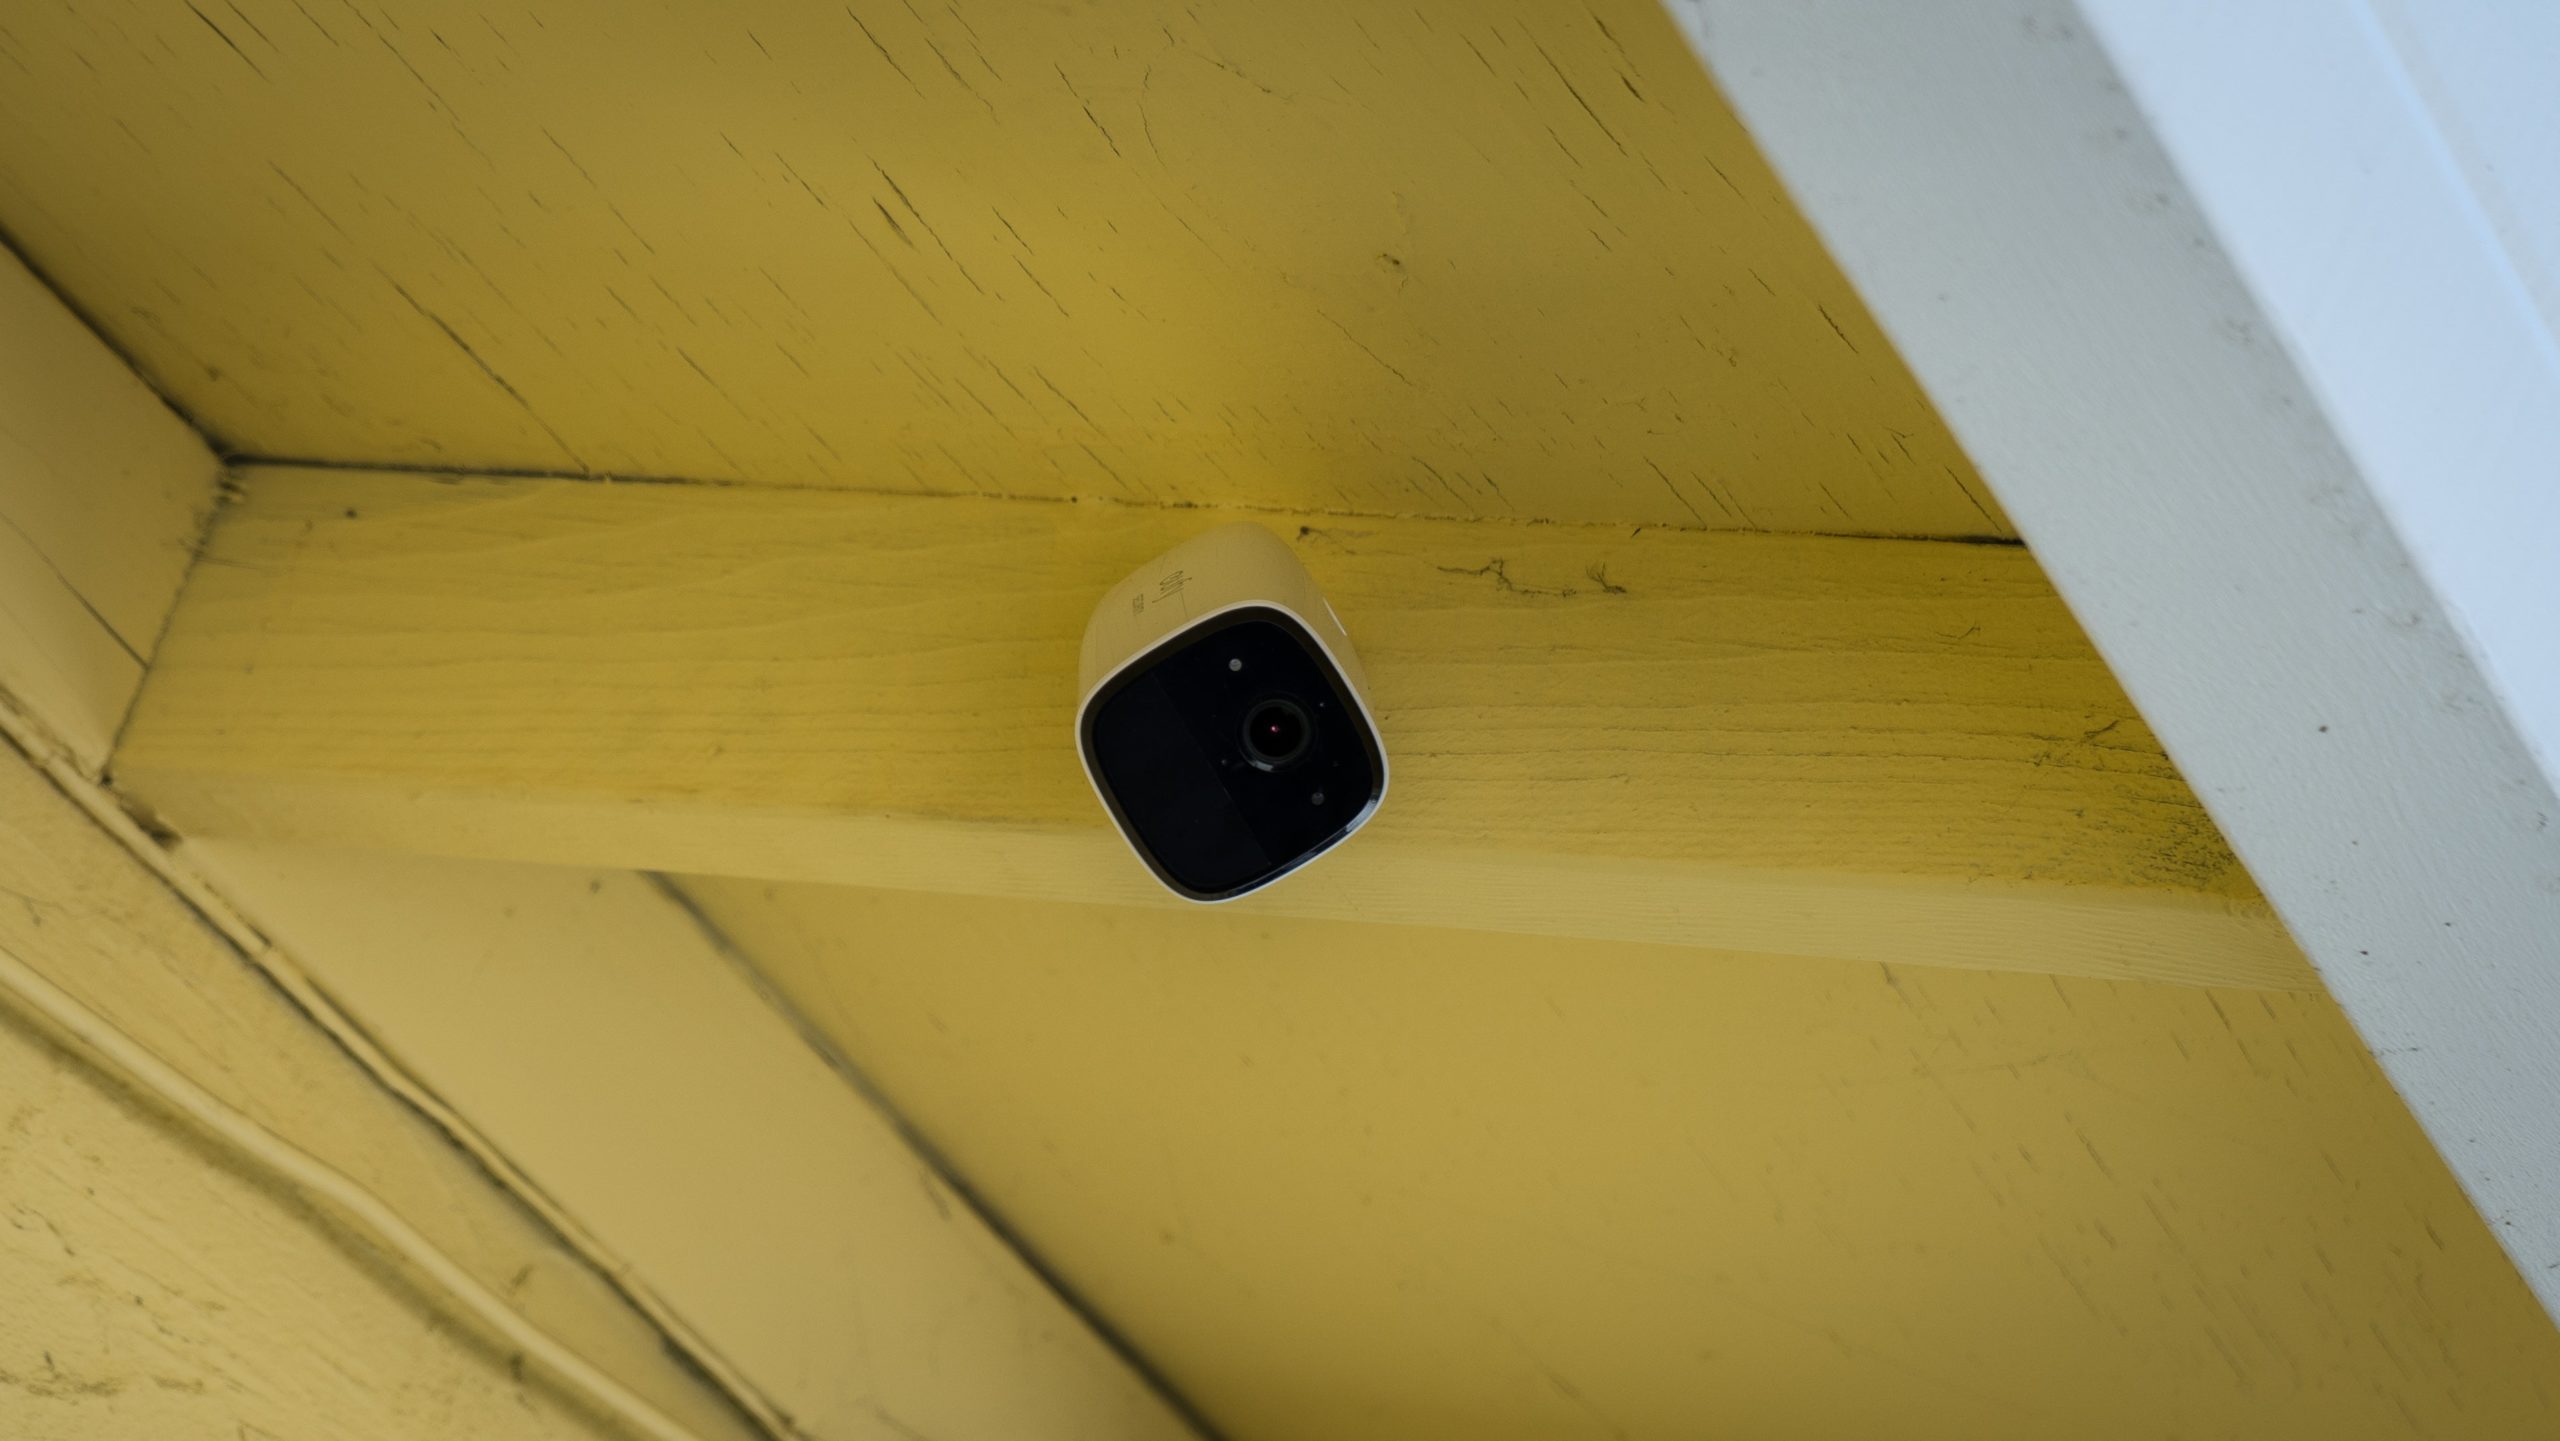 The Eufy SoloCam E40 can see up to 7.92 m in the nighttime.